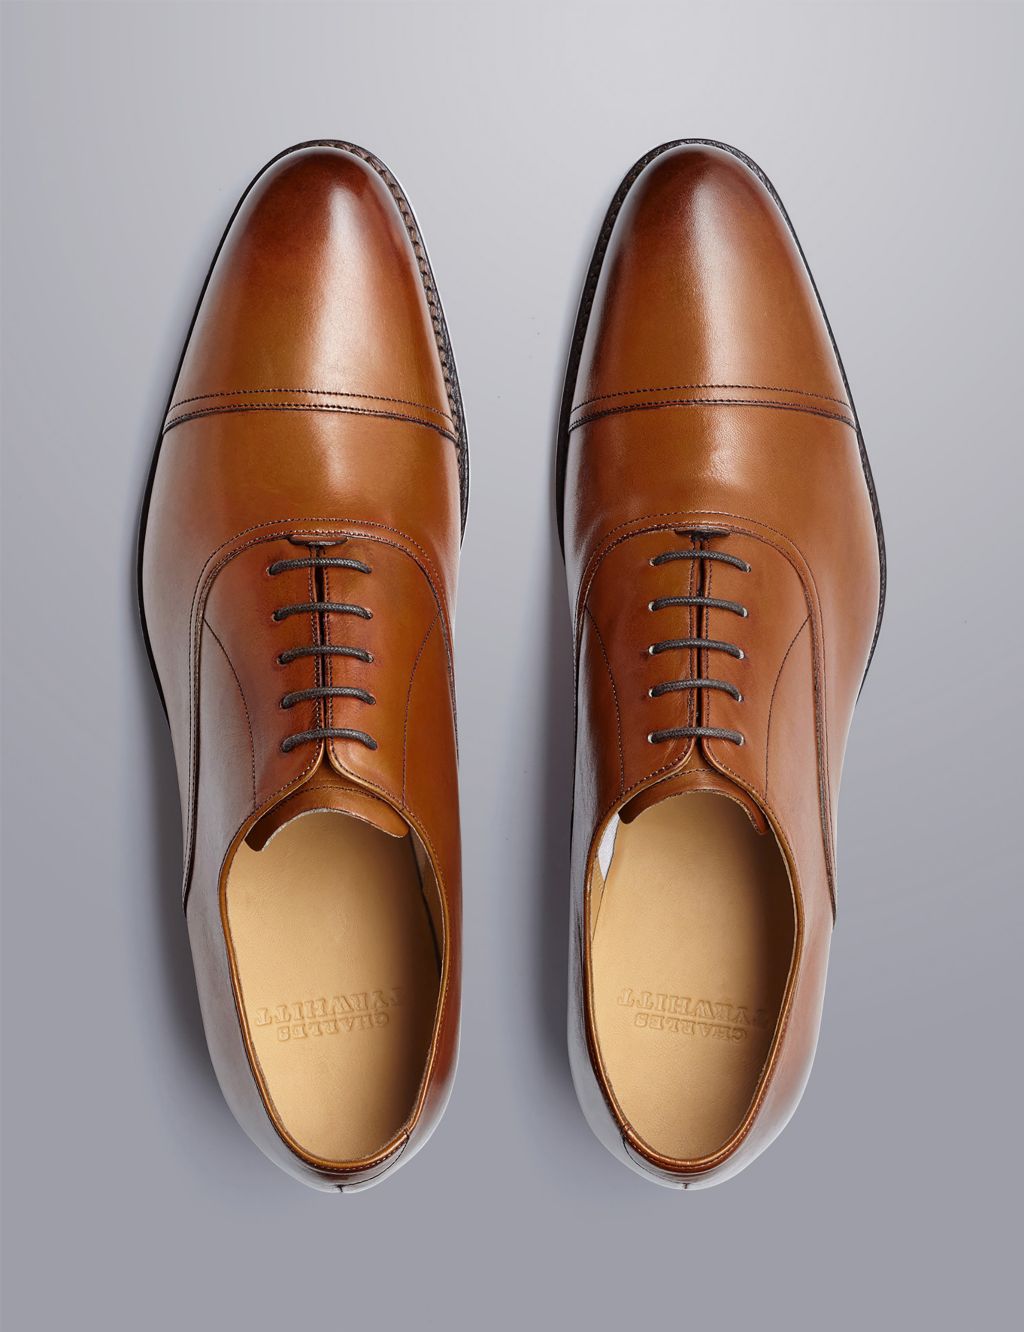 Leather Oxford Shoes image 2